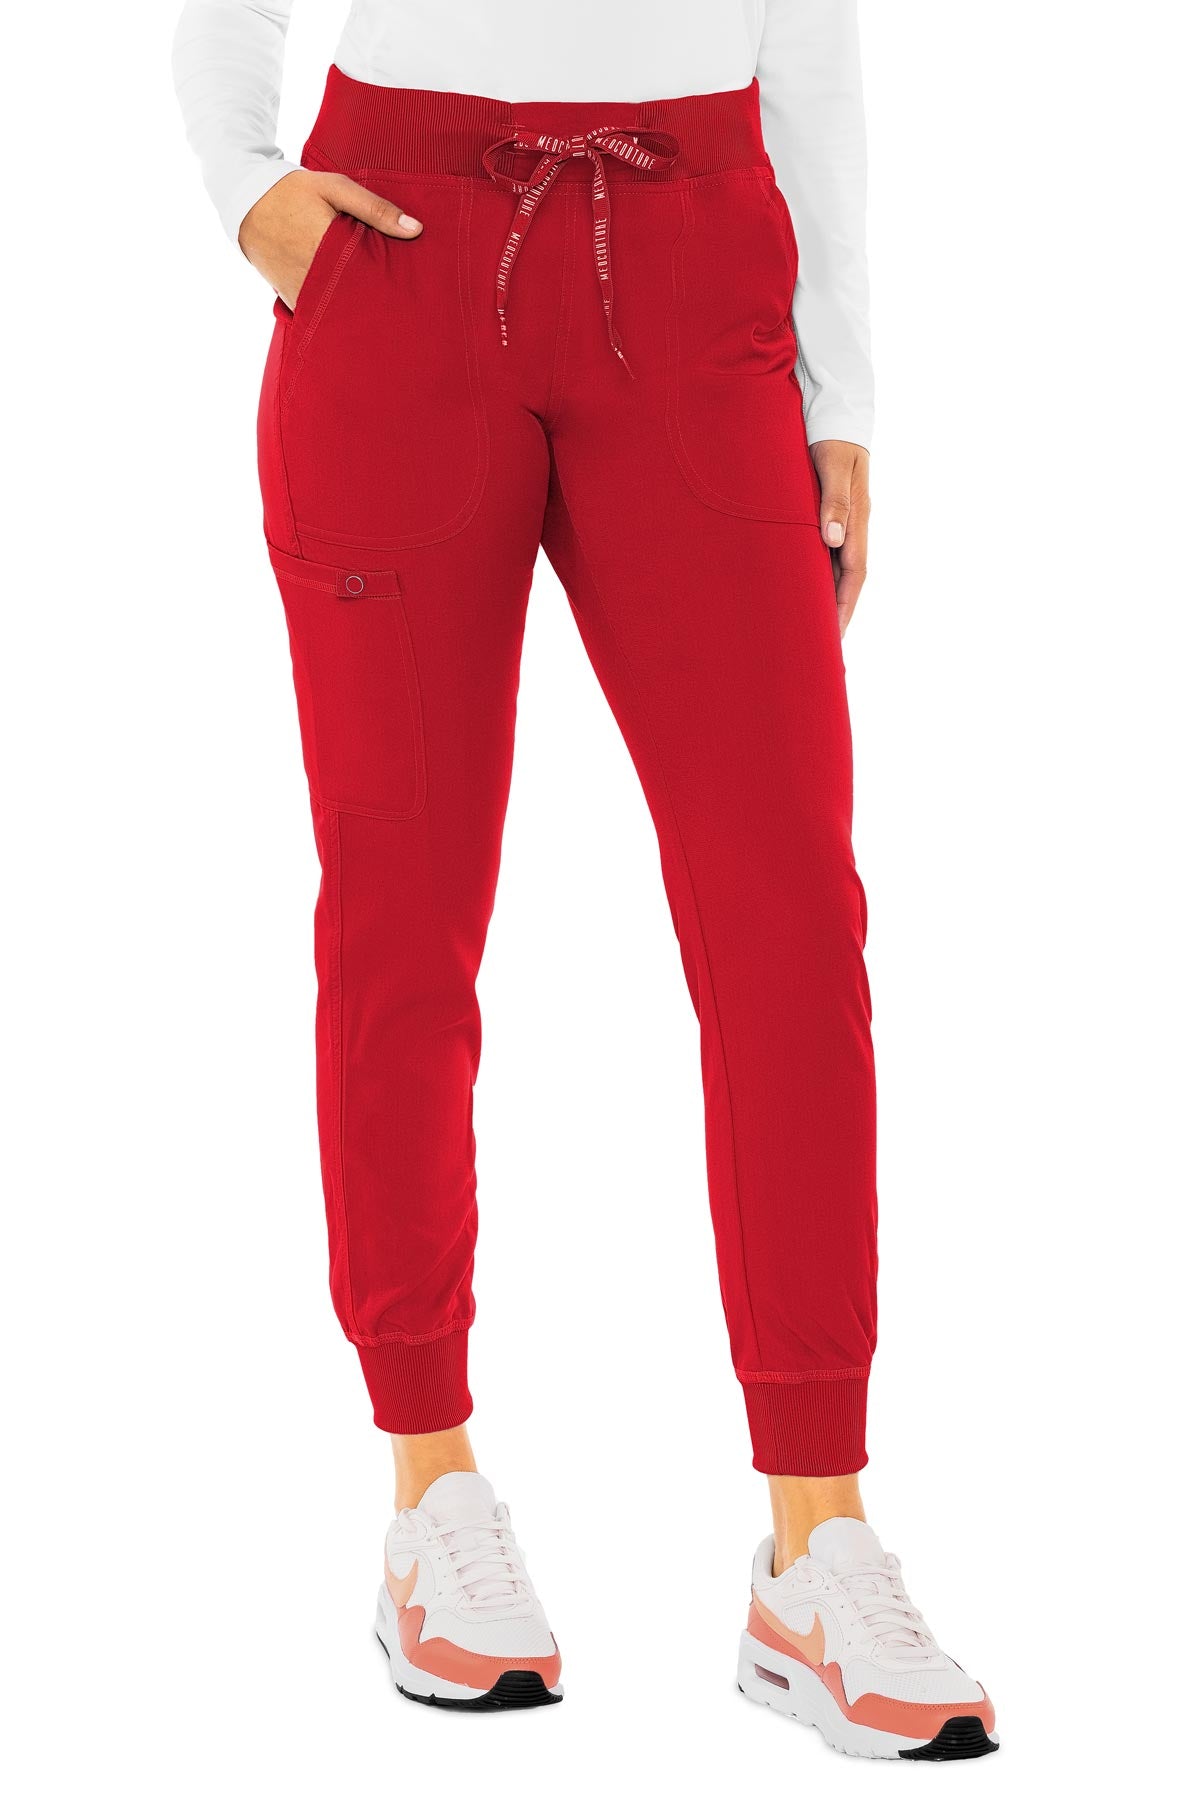 Naomi Joggers- Red – Gifted Hands Scrubs